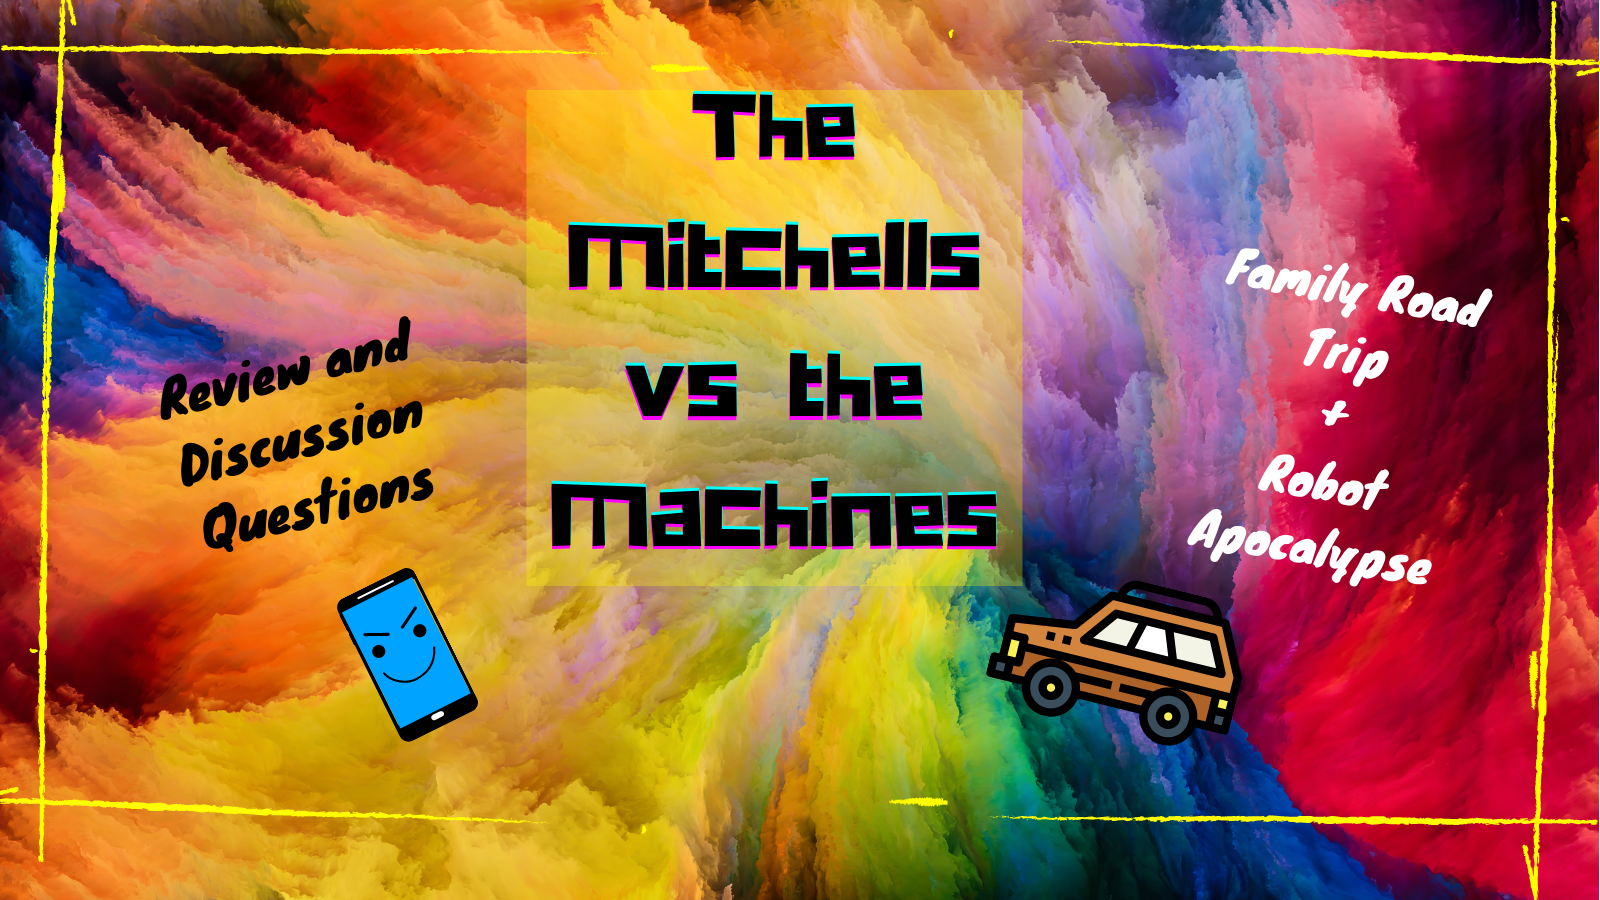 Mithcells vs the machines review